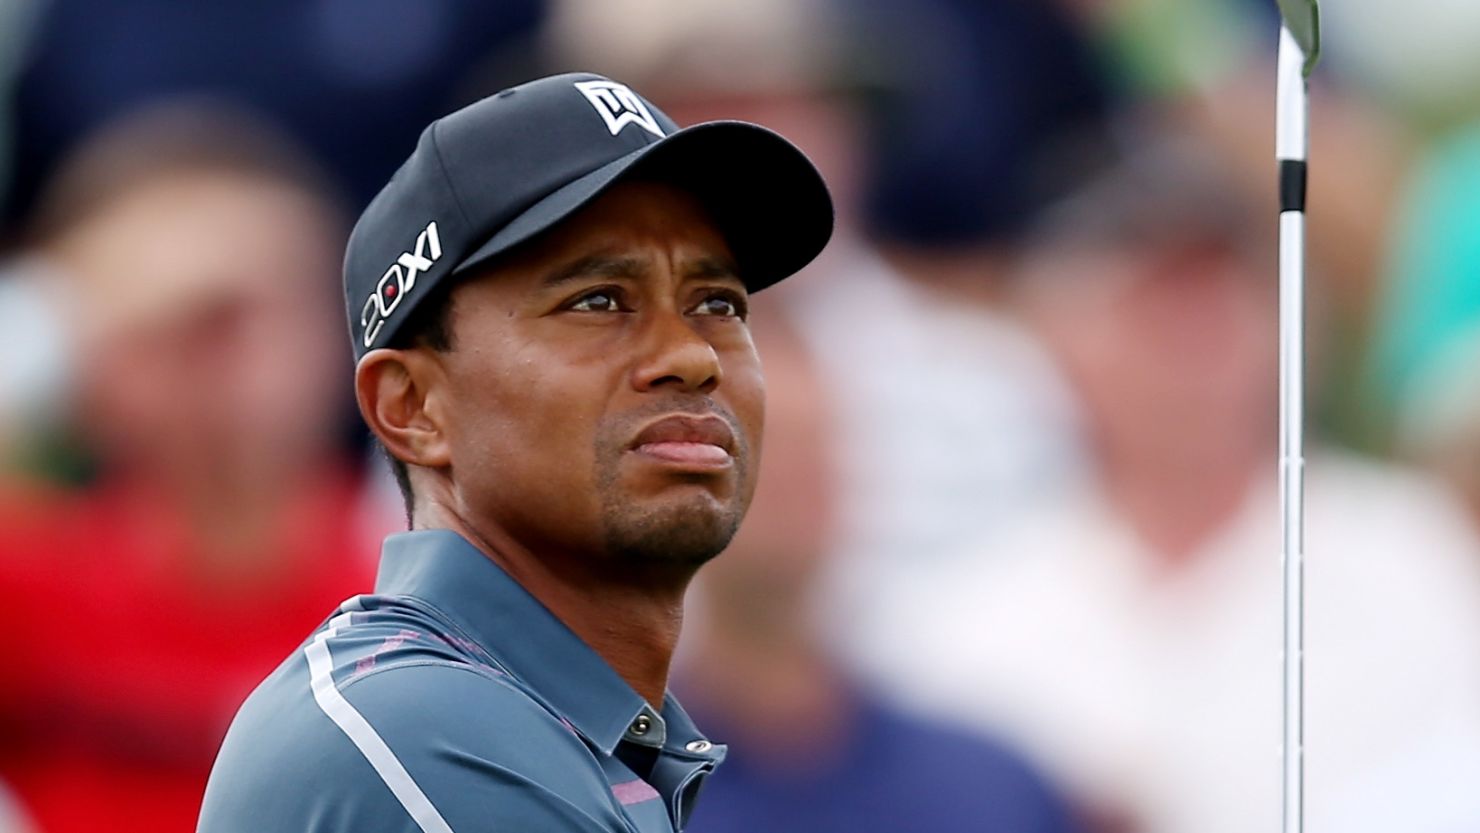 FedEx Cup series leader Tiger Woods has never won The Barclays tournament.